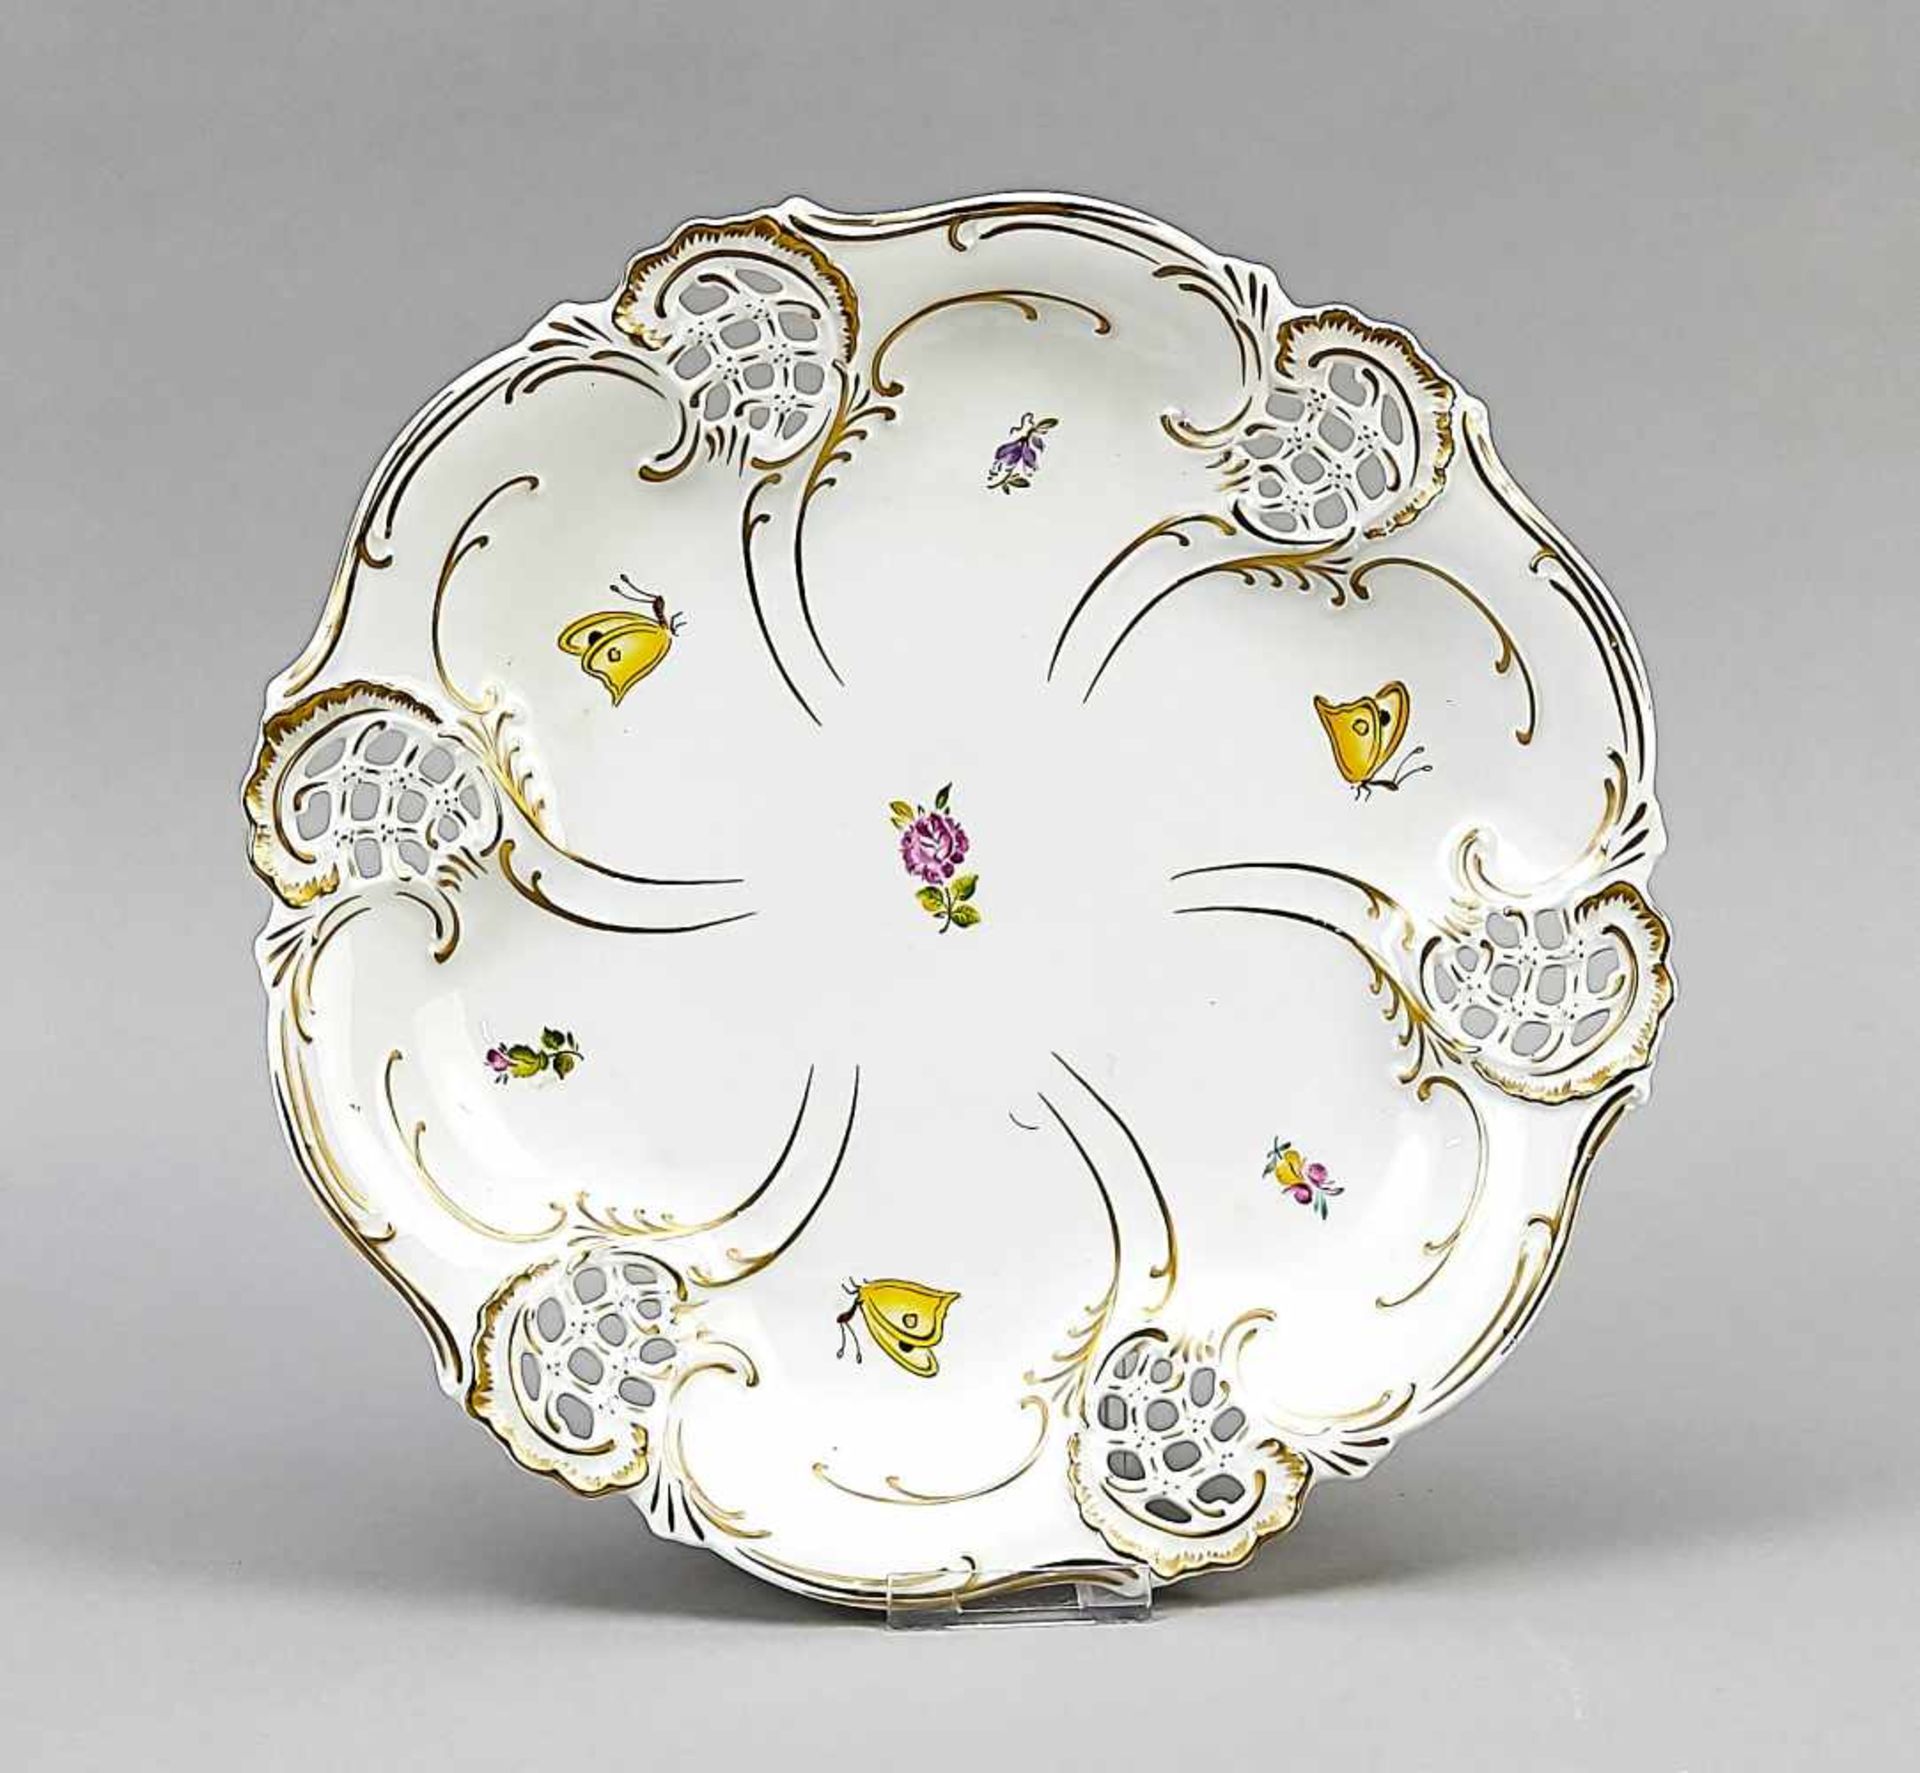 Splendid plate with butterfly, Meissen-imitation mark, curved shape, polychrome painting